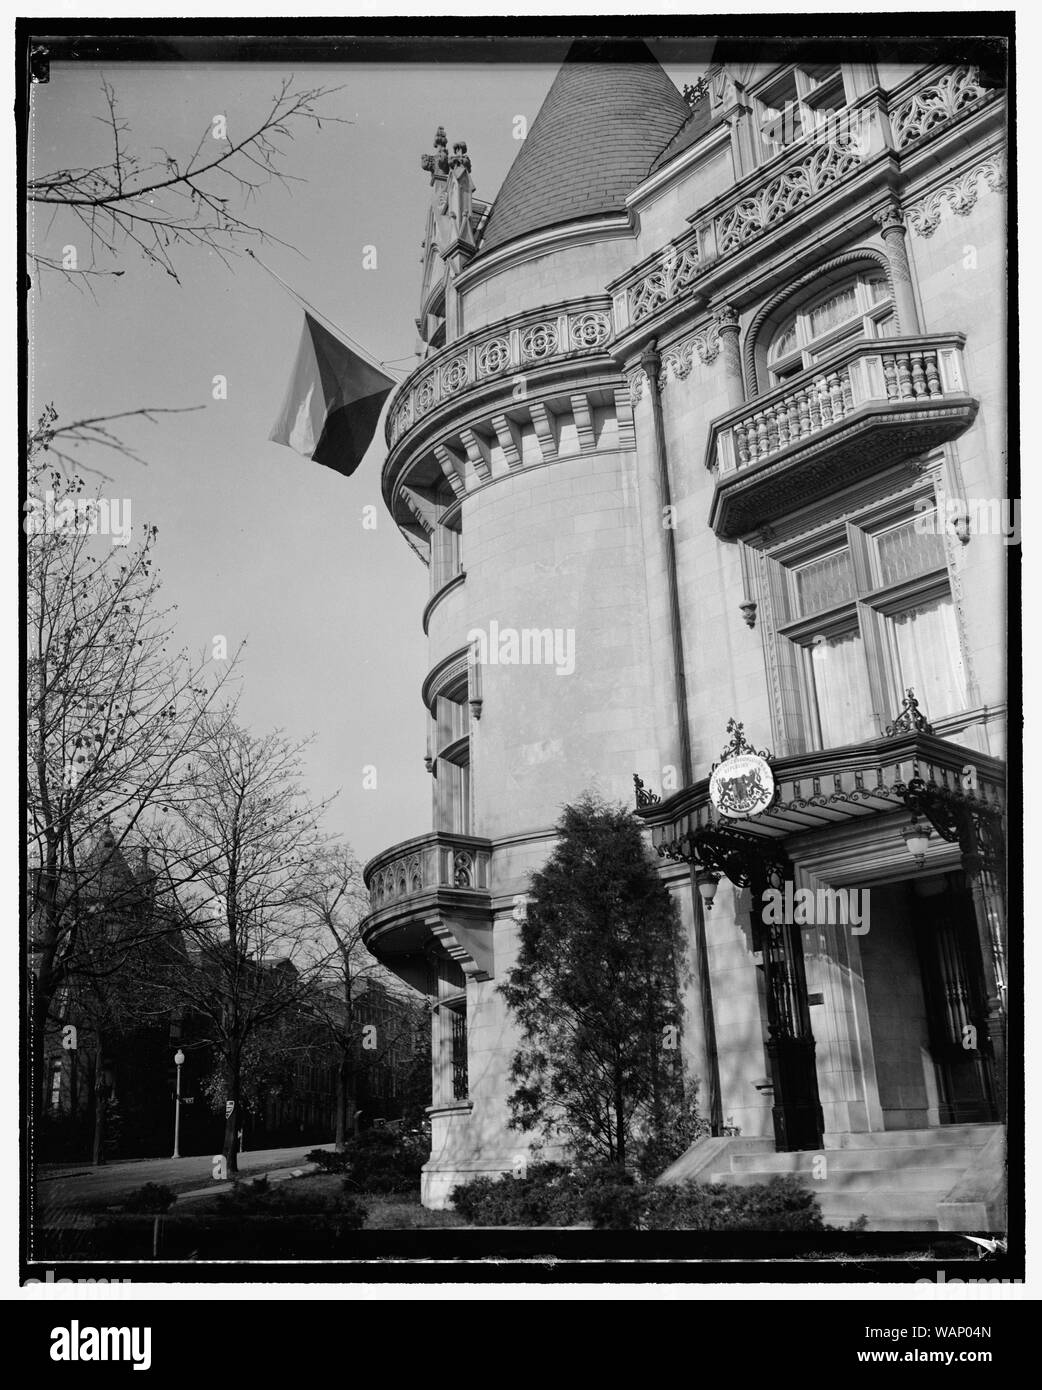 Czech Legation flag at half-mast. Washington, D.C., Nov. 18. Nine students suspected of anti-nazi outbreaks in Prague have been executed by German storm troopers and 1200 more held under arrest. At Berlin, a high official said that while the execution of the students 'may seem harsh,' it was necessary because Germany was at war and 'can not allow the Czech people to be contaminated by a few hotheads.' Picture shows the Czech Legation in Washington flying its colors at half-mast Stock Photo